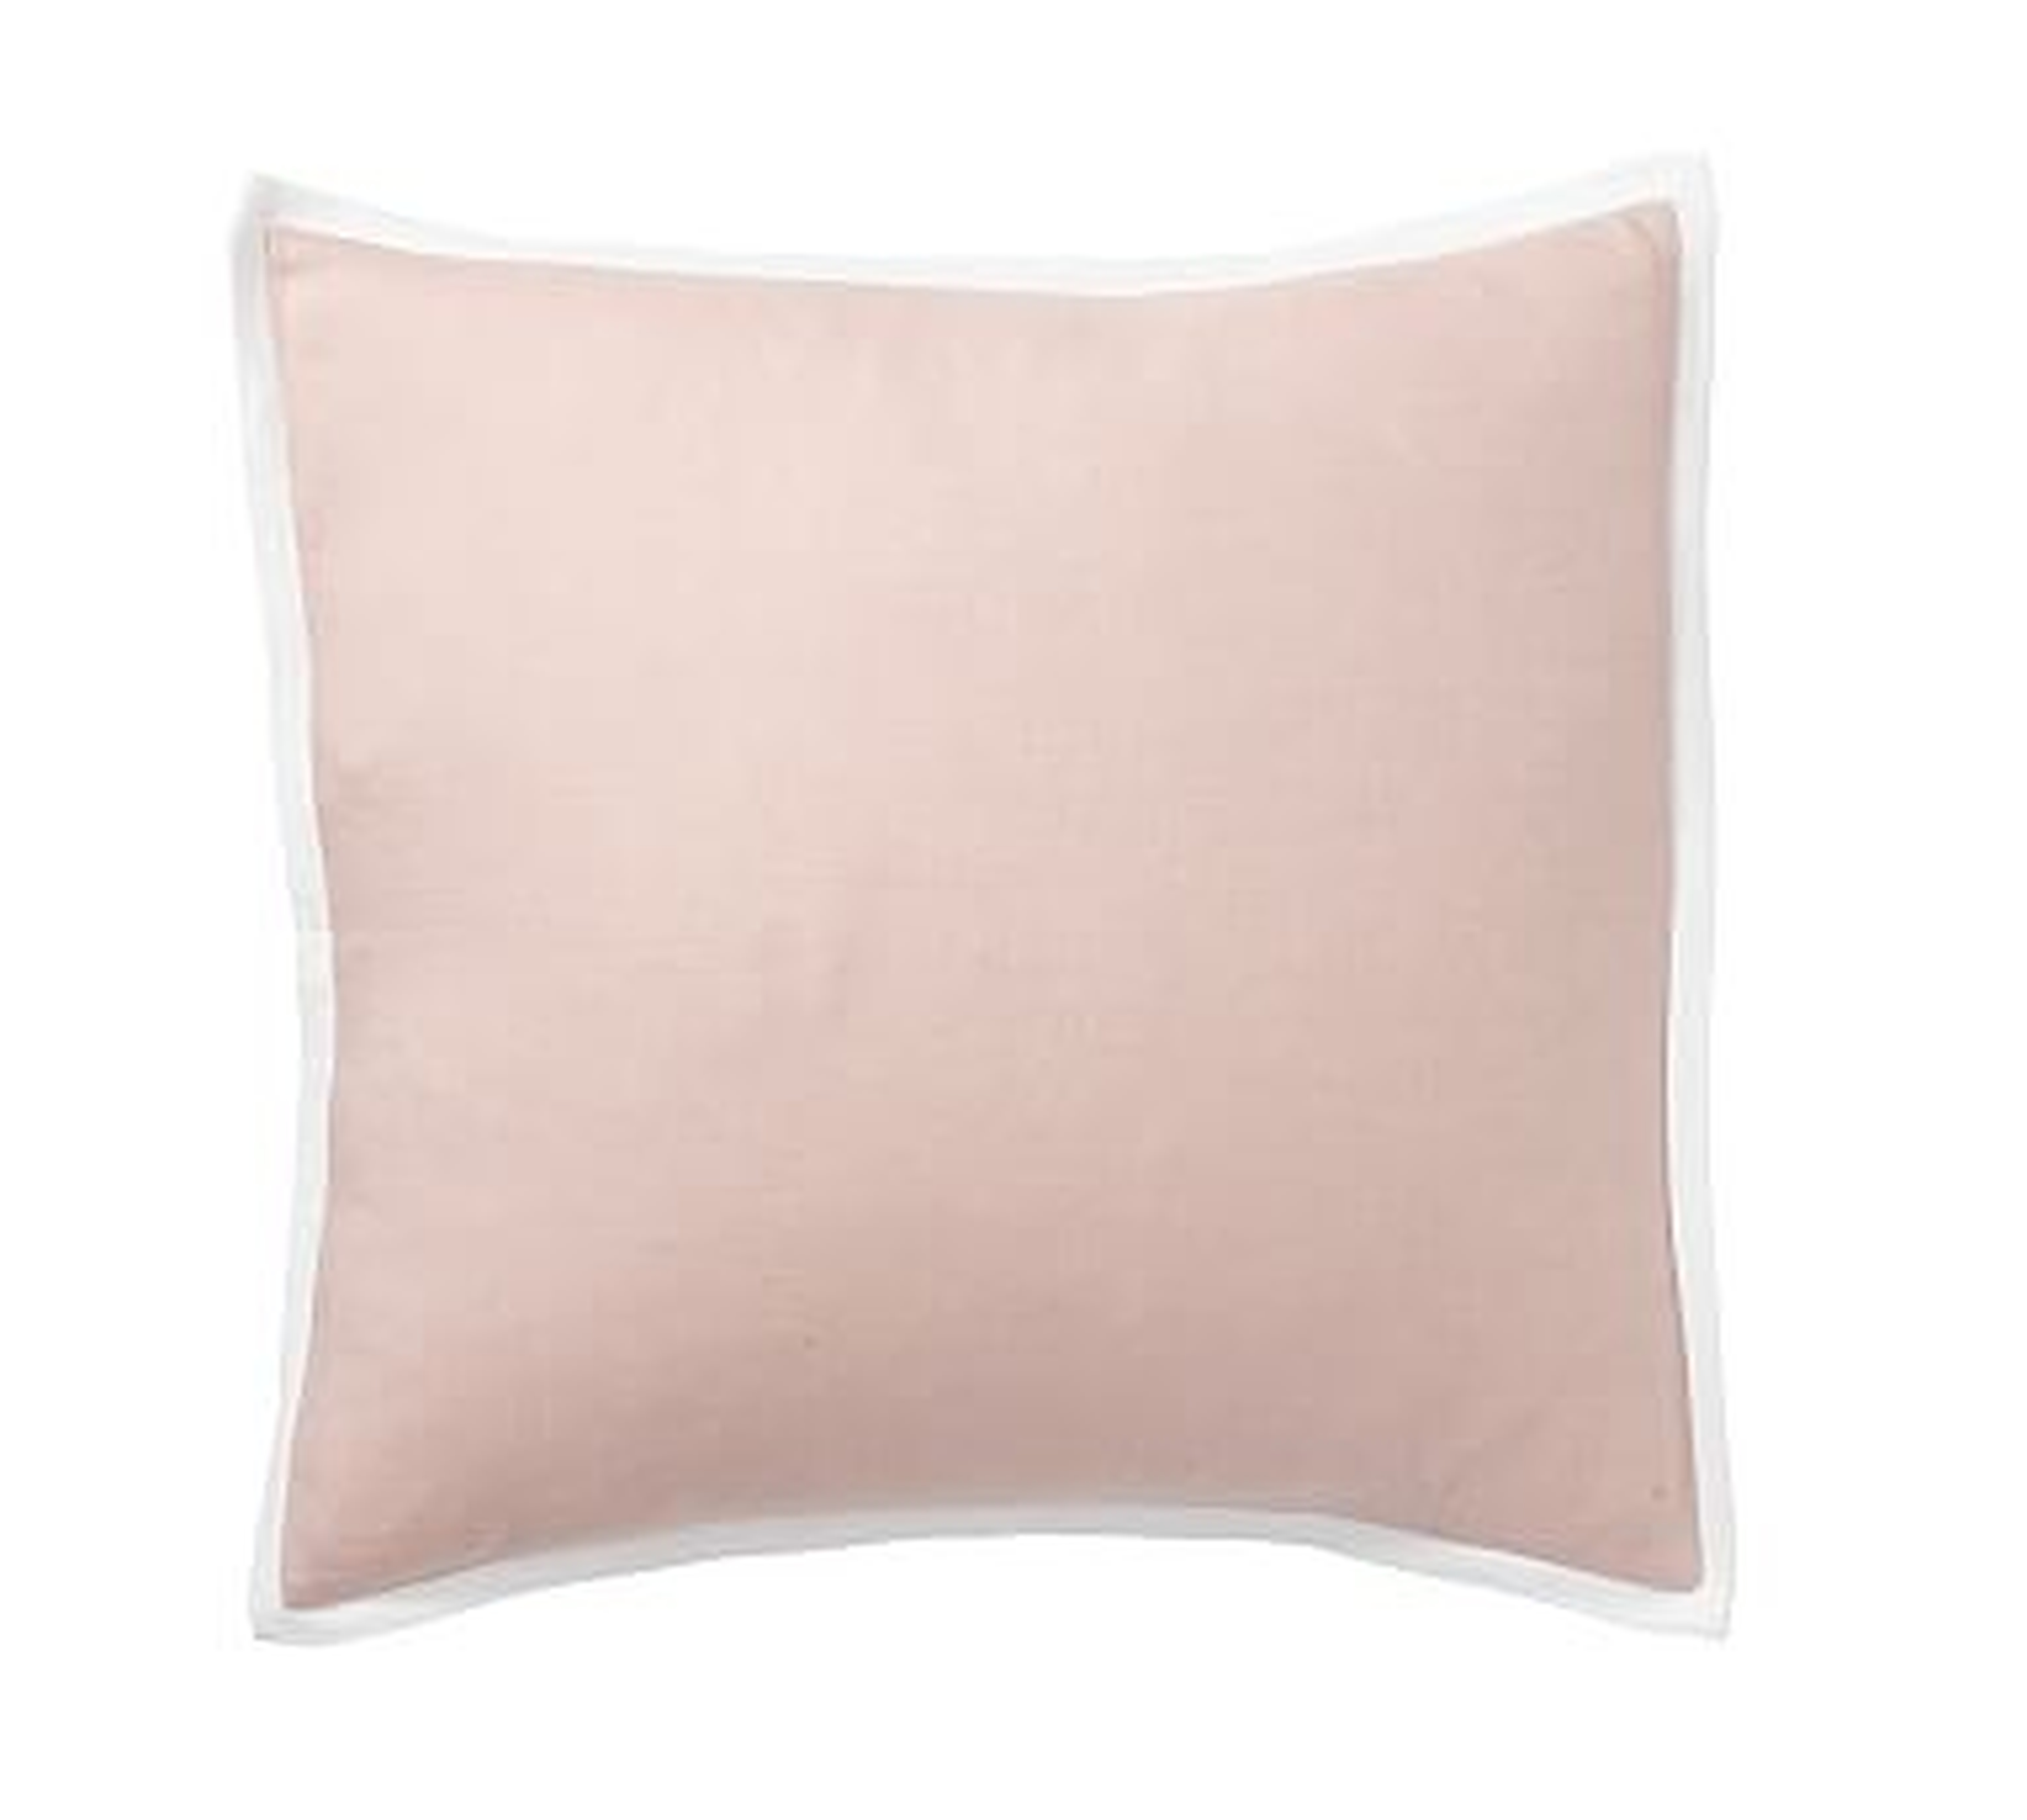 Belgian Flax Linen Contrast Flange Pillow Cover, 18", Soft Rose/White - Pottery Barn